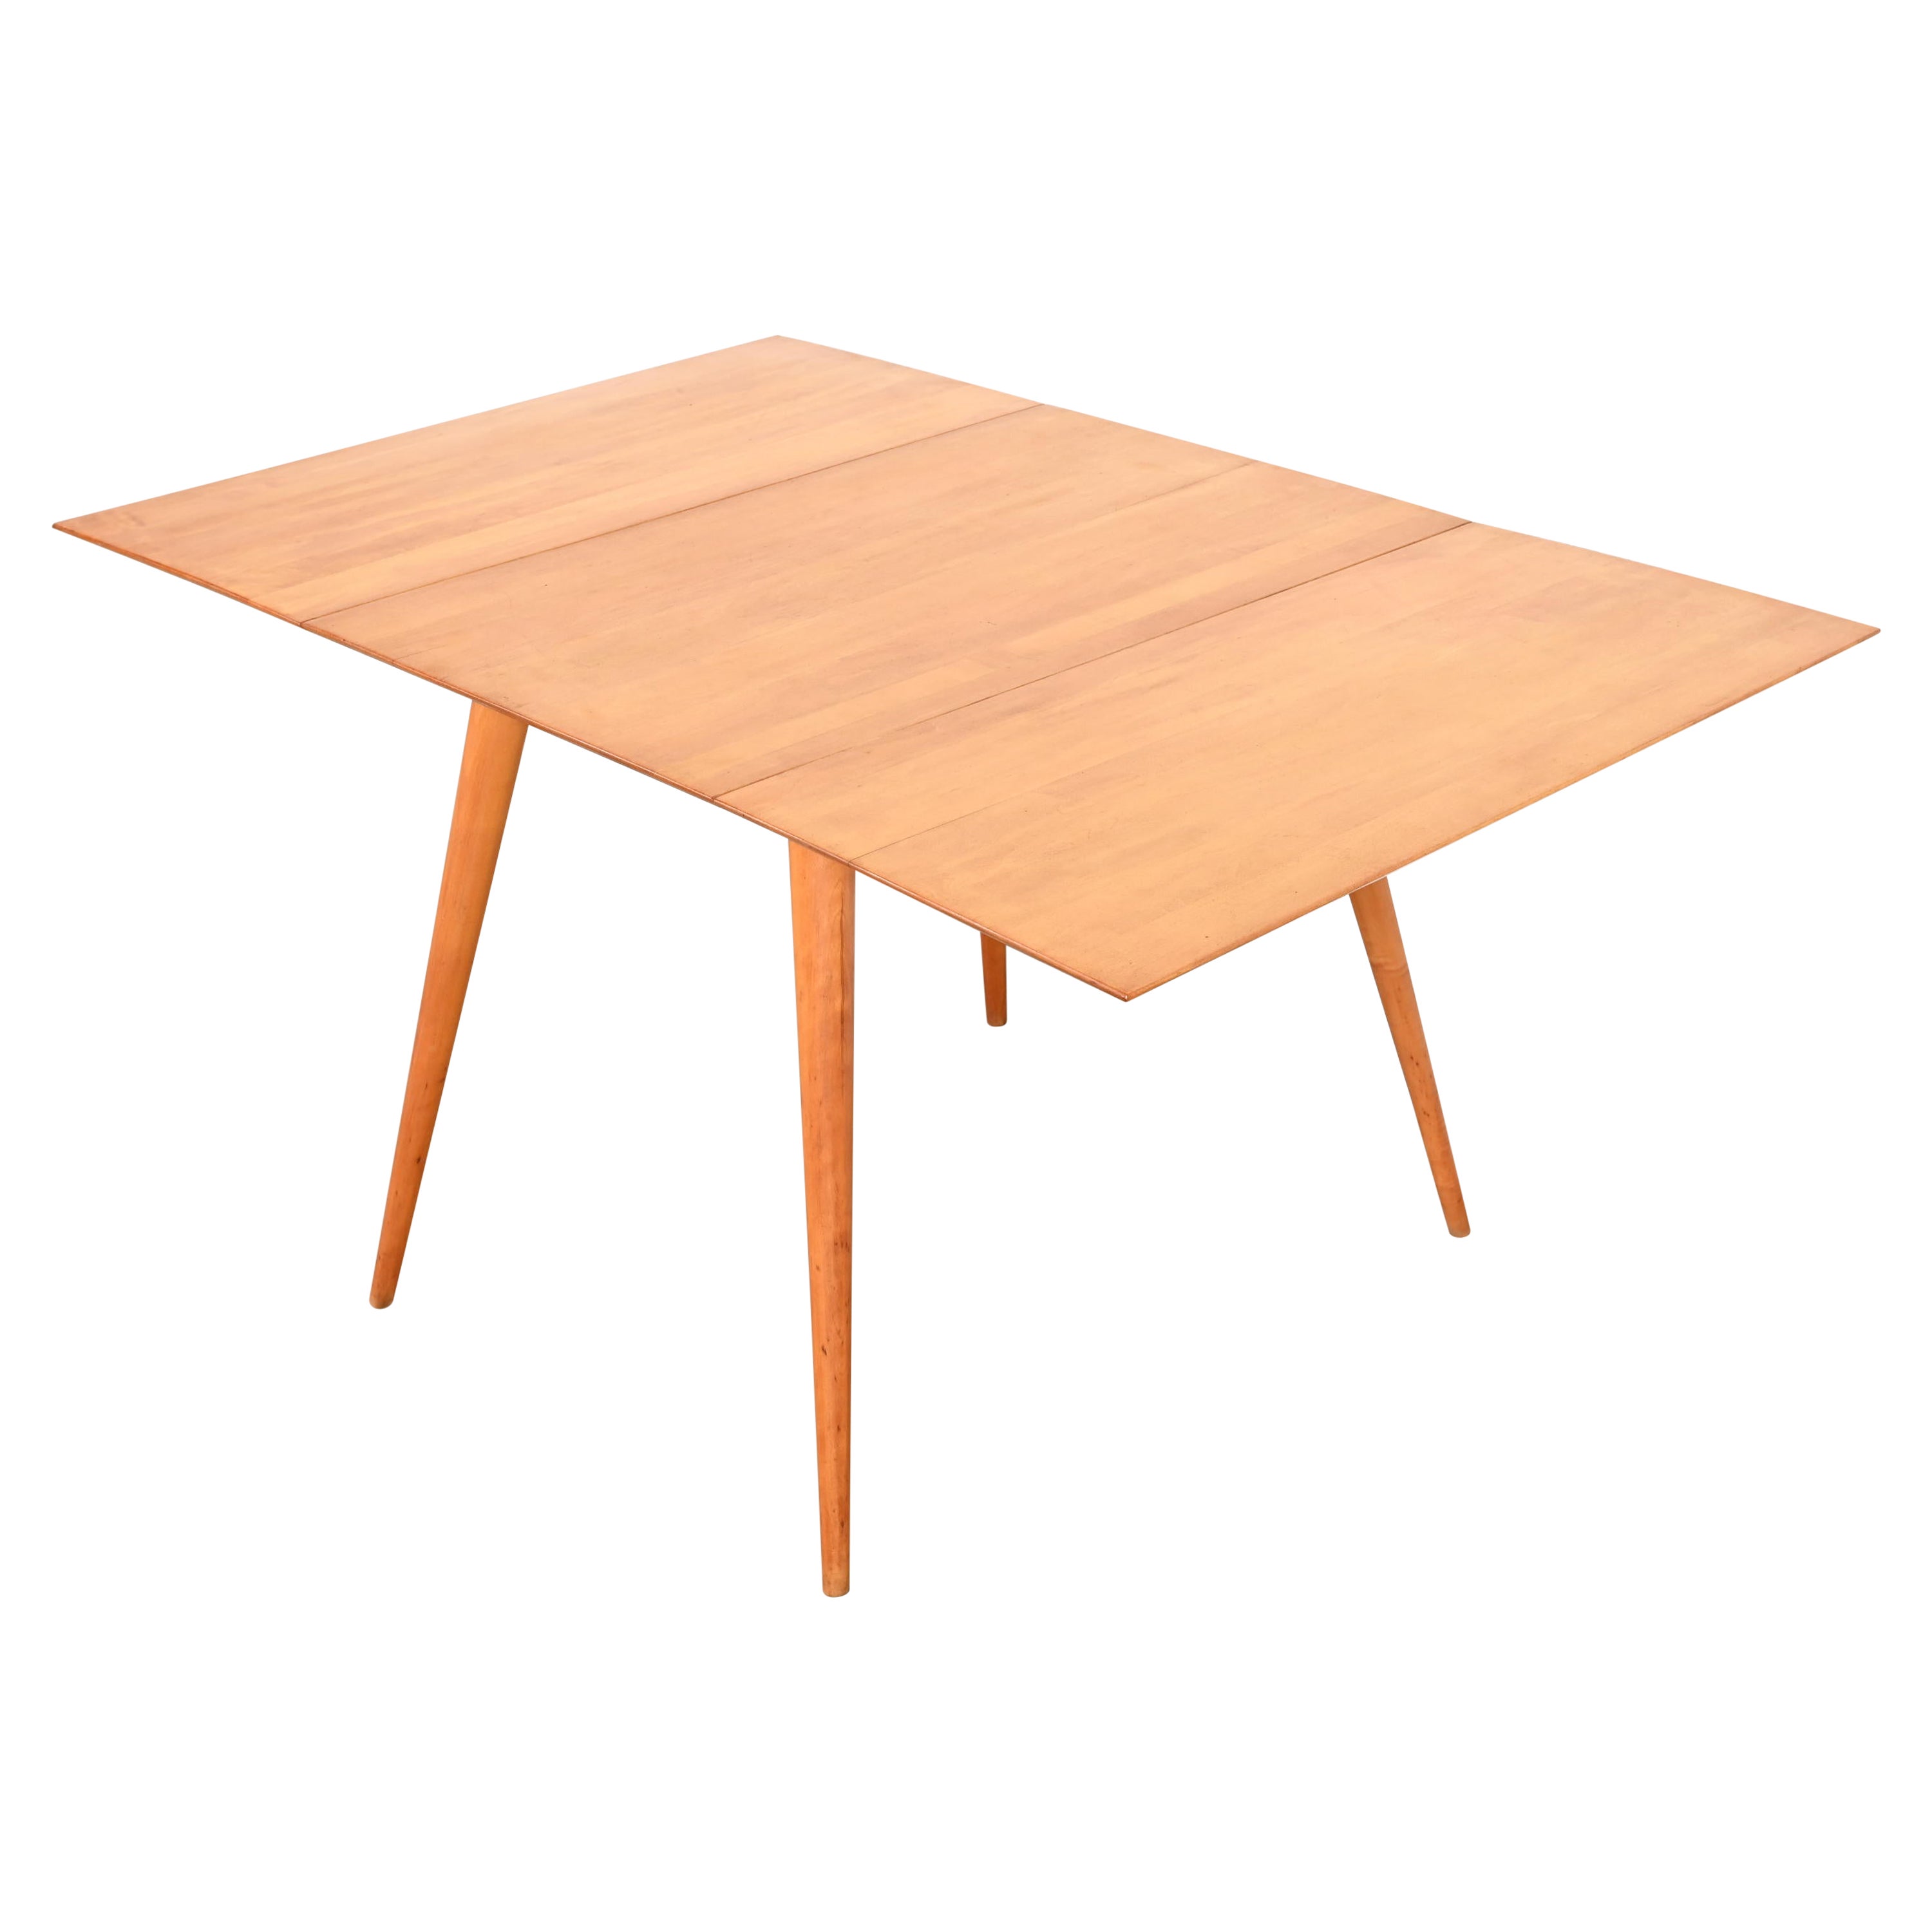 Paul McCobb Planner Group Solid Maple Drop Leaf Dining Table, 1950s For Sale